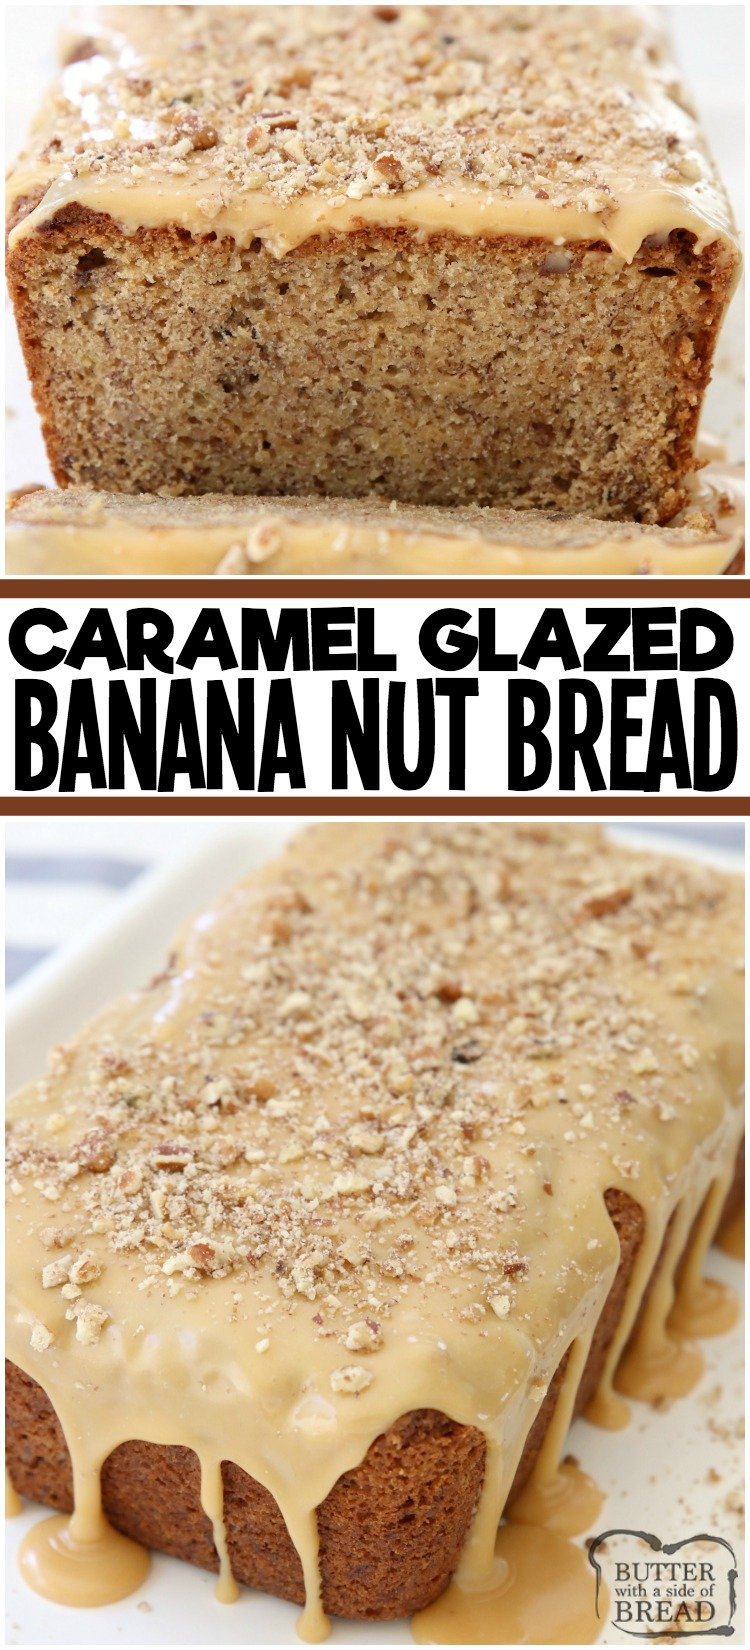 Caramel Banana Nut Bread made with ripe bananas and spiced with cinnamon, nutmeg and ginger. Topped with buttery streusel & caramel glaze. Best Banana Nut Quick Bread recipe ever!